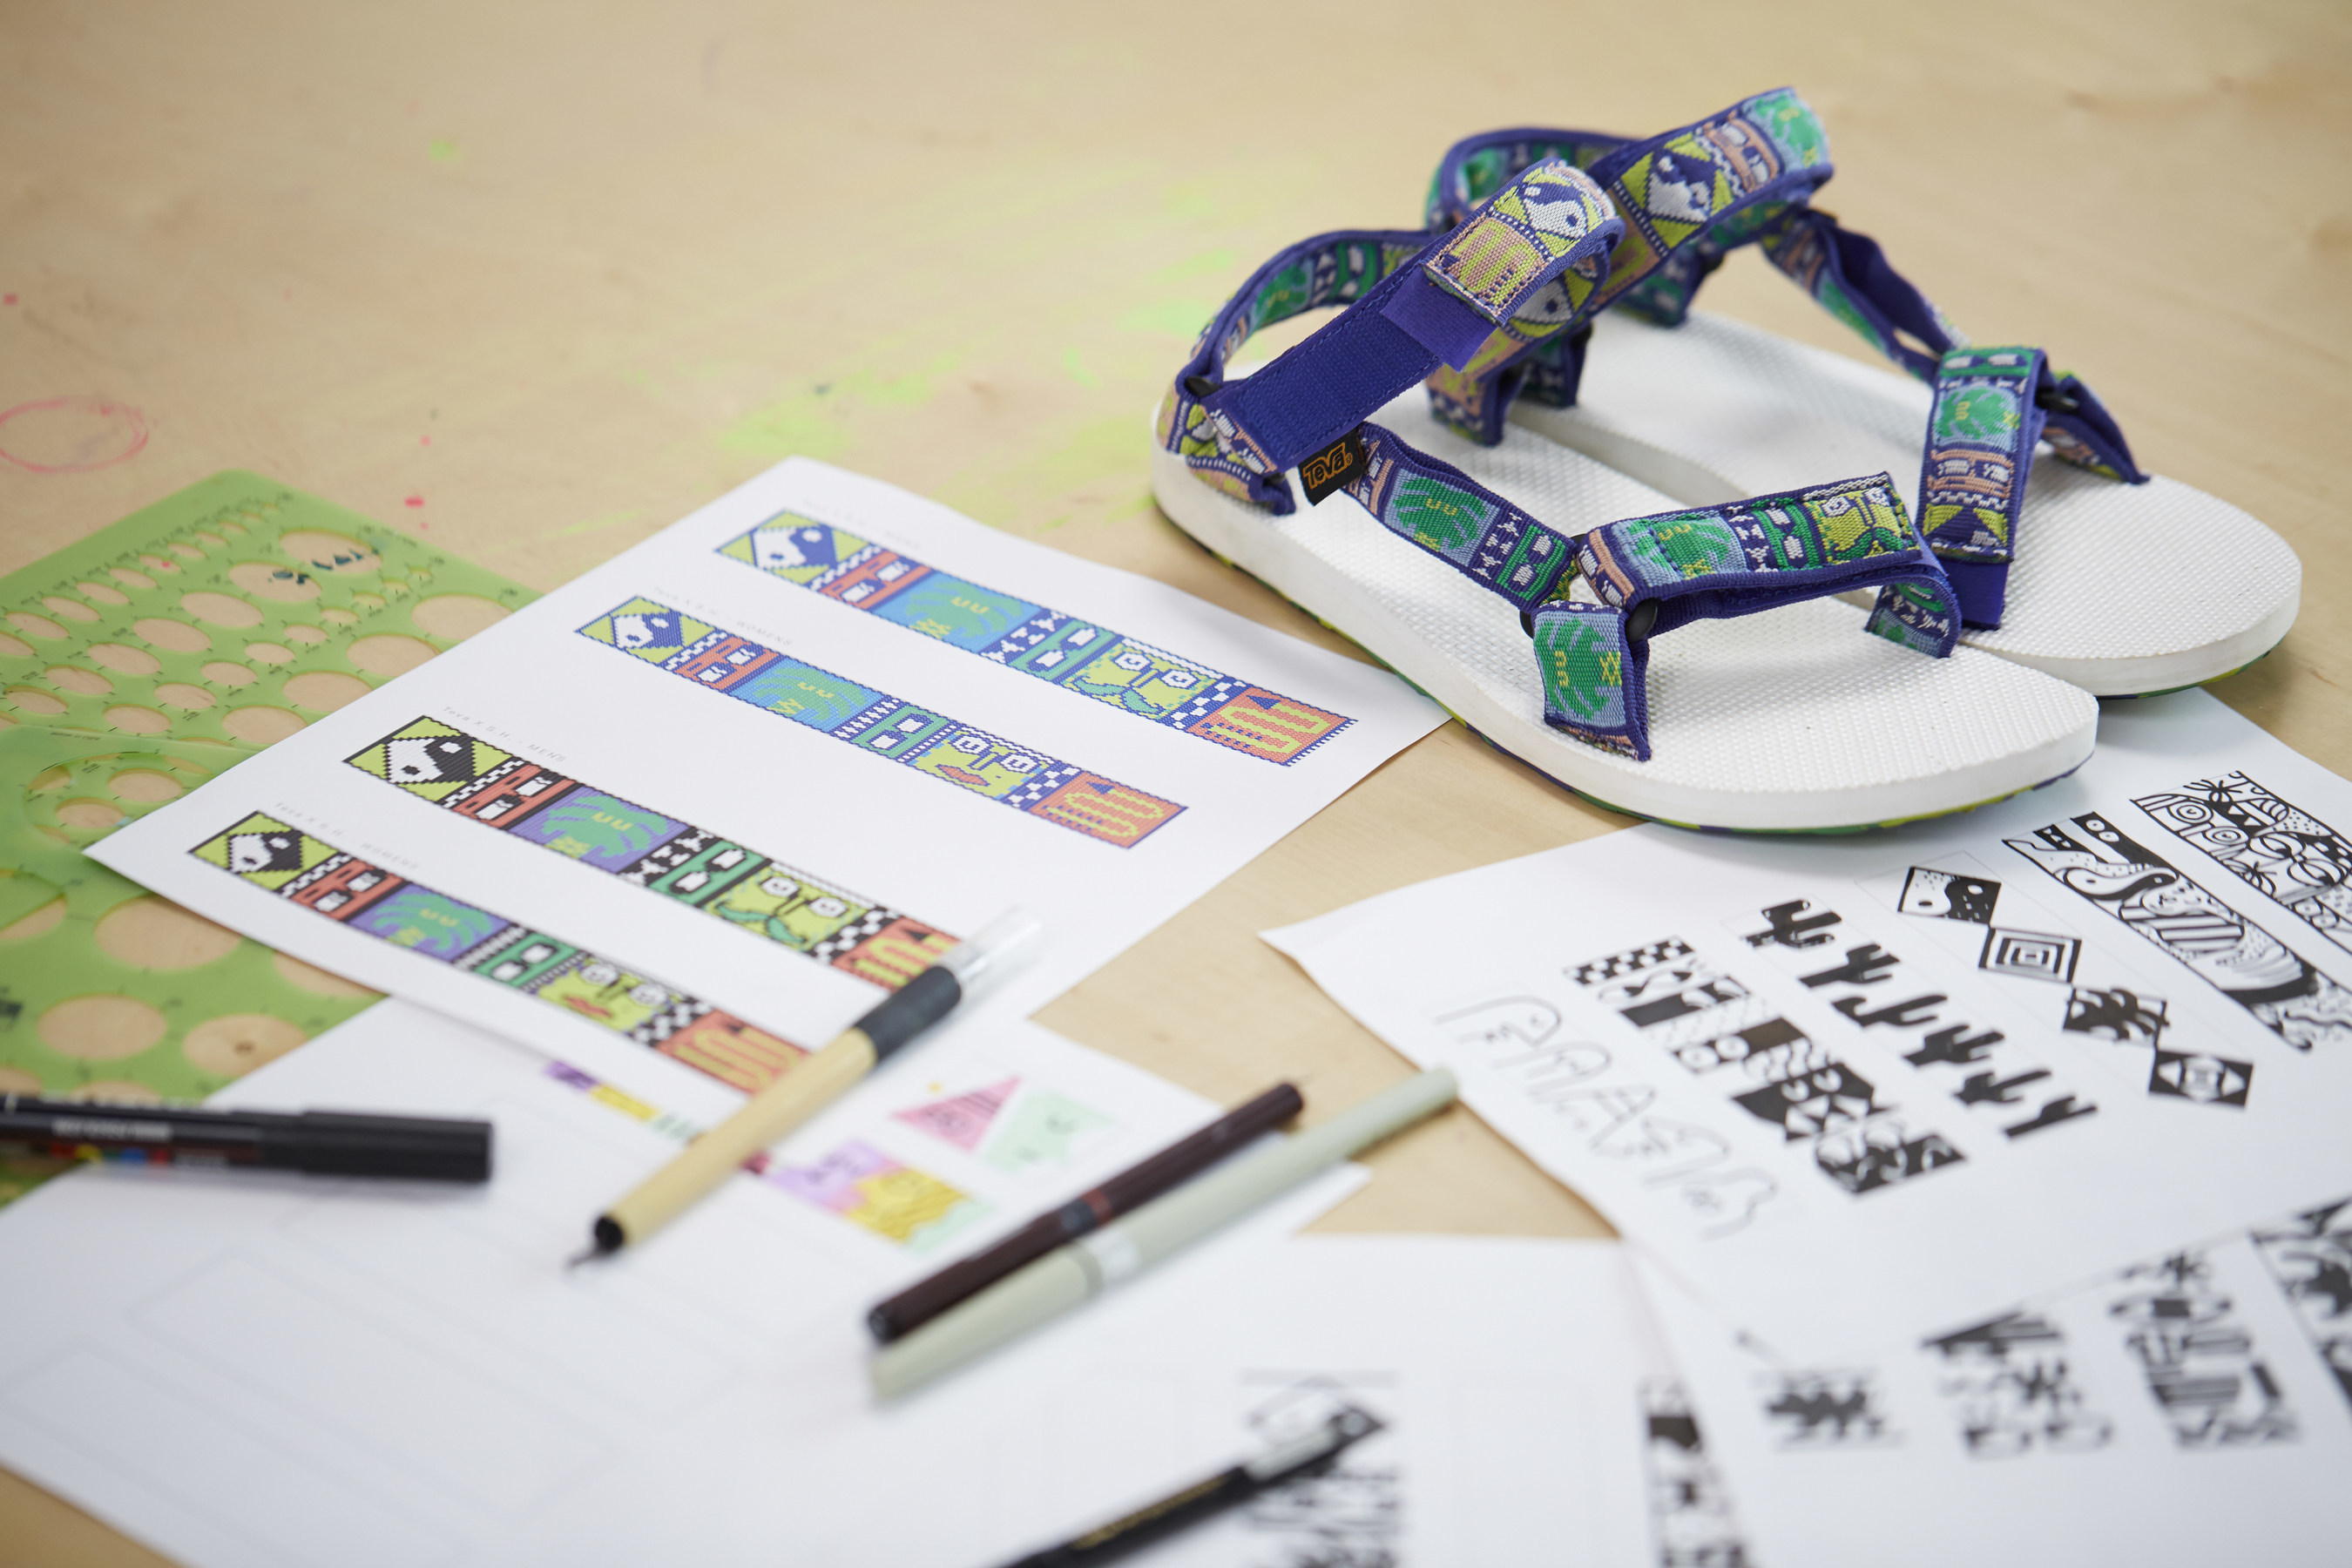 Teva introduces a new Artist Series collection featuring artwork by National Forest, turning the iconic sandal silhouette into a canvas for California designers.